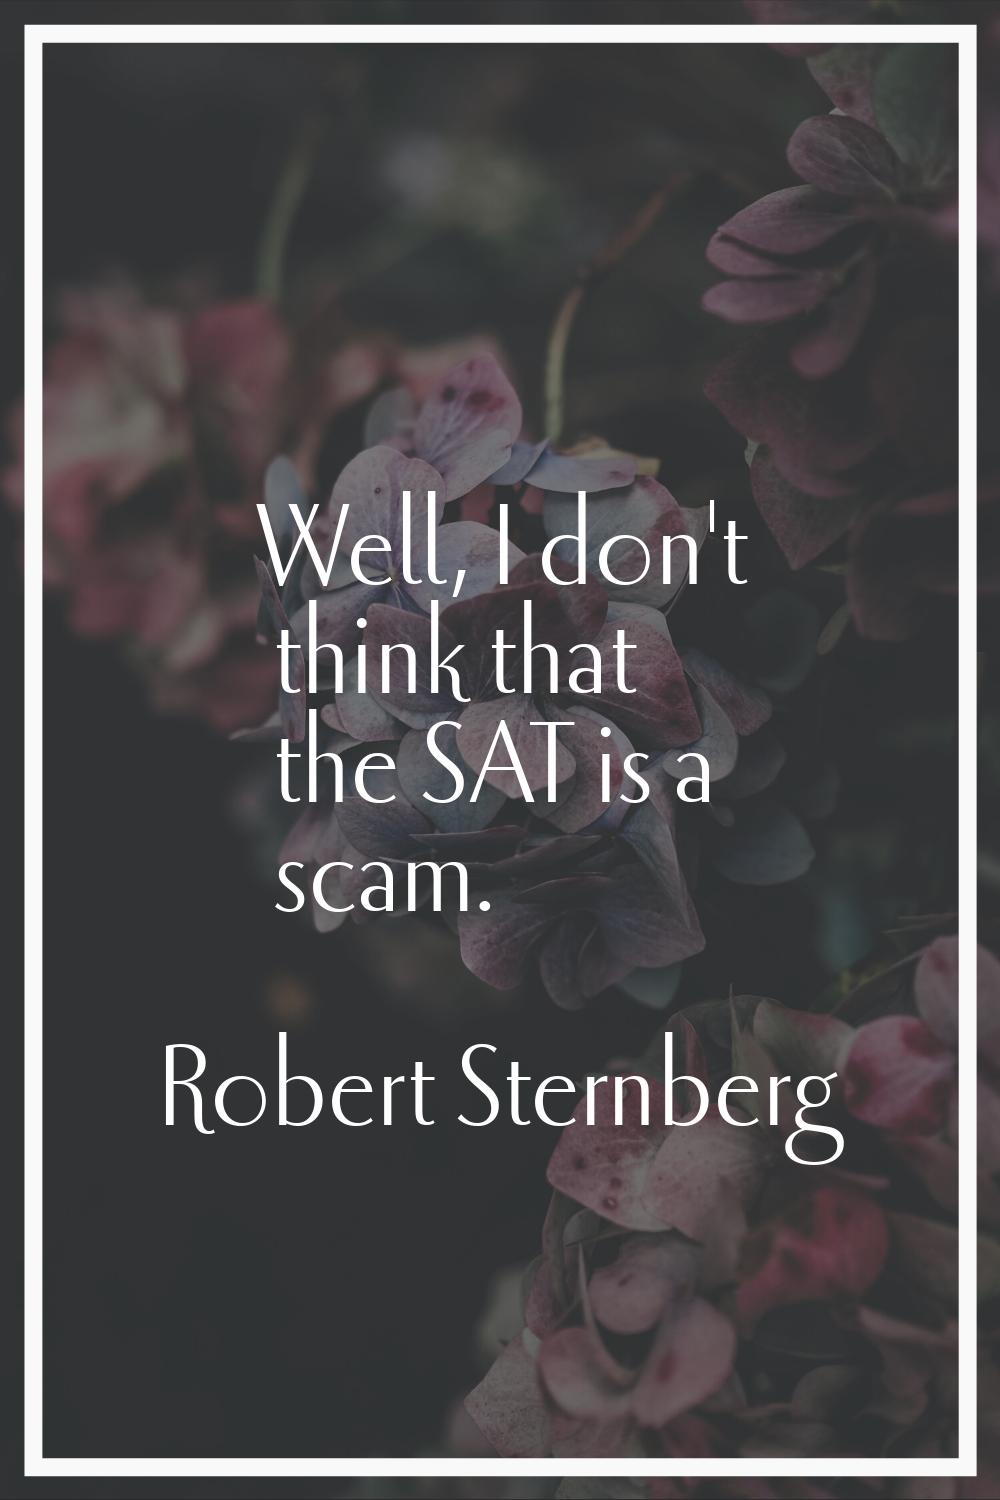 Well, I don't think that the SAT is a scam.